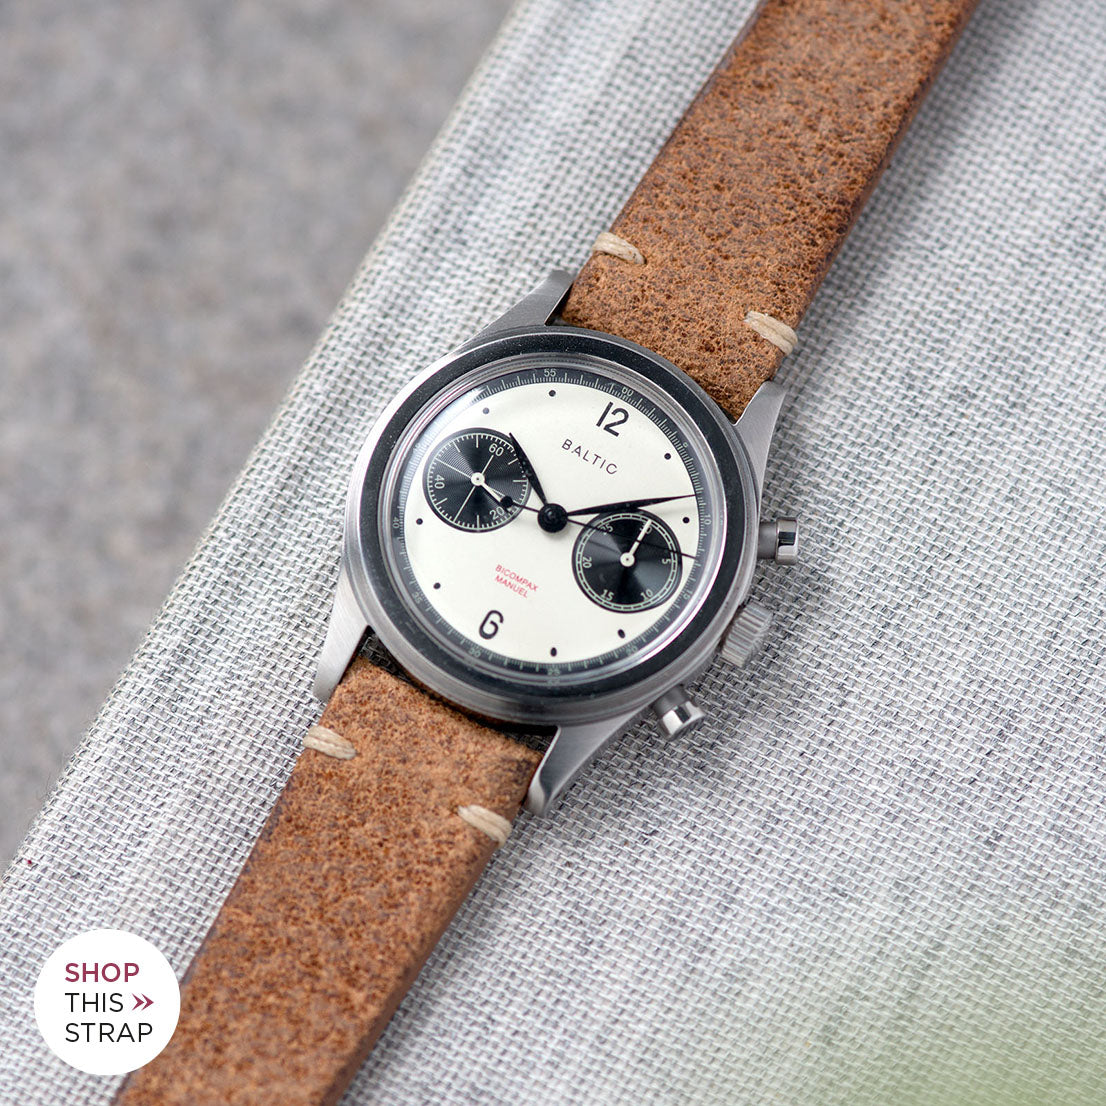 Bulang and Sons_Strap Guide_The Baltic-Chronograph-Panda-Limited-Edition_Crackle Brown Leather Watch Strap